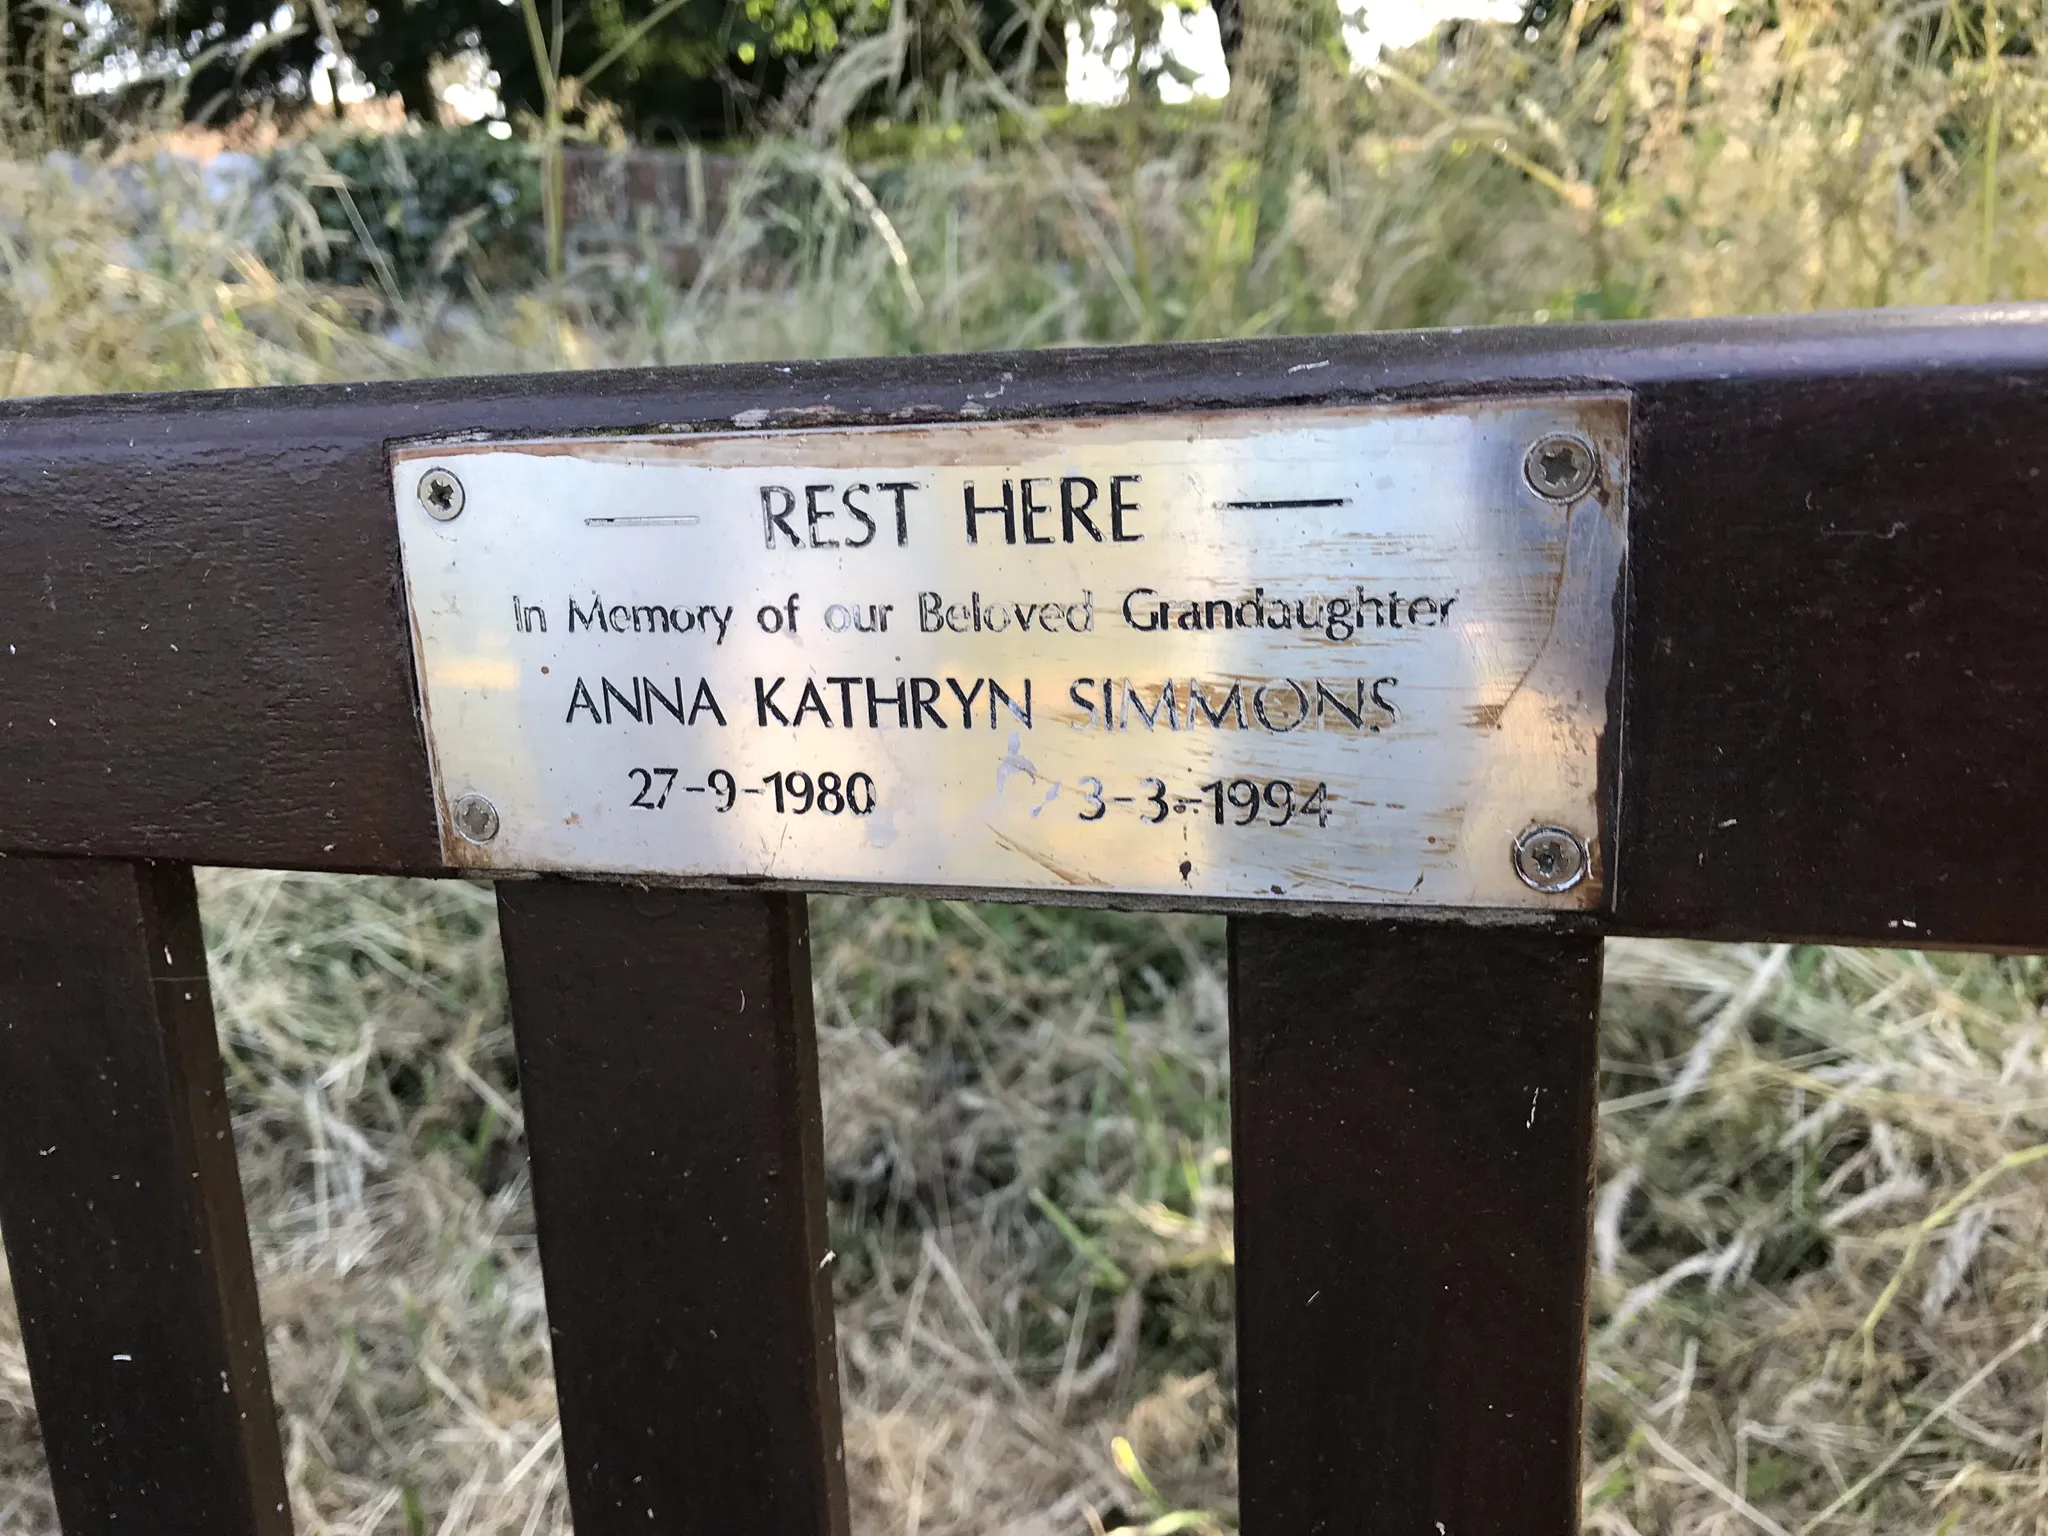 Photo showing: REST HERE
In Memory of our Beloved Grandaughter
ANNA KATHRYN SIMMONS
27-9-1980             3-3-1994